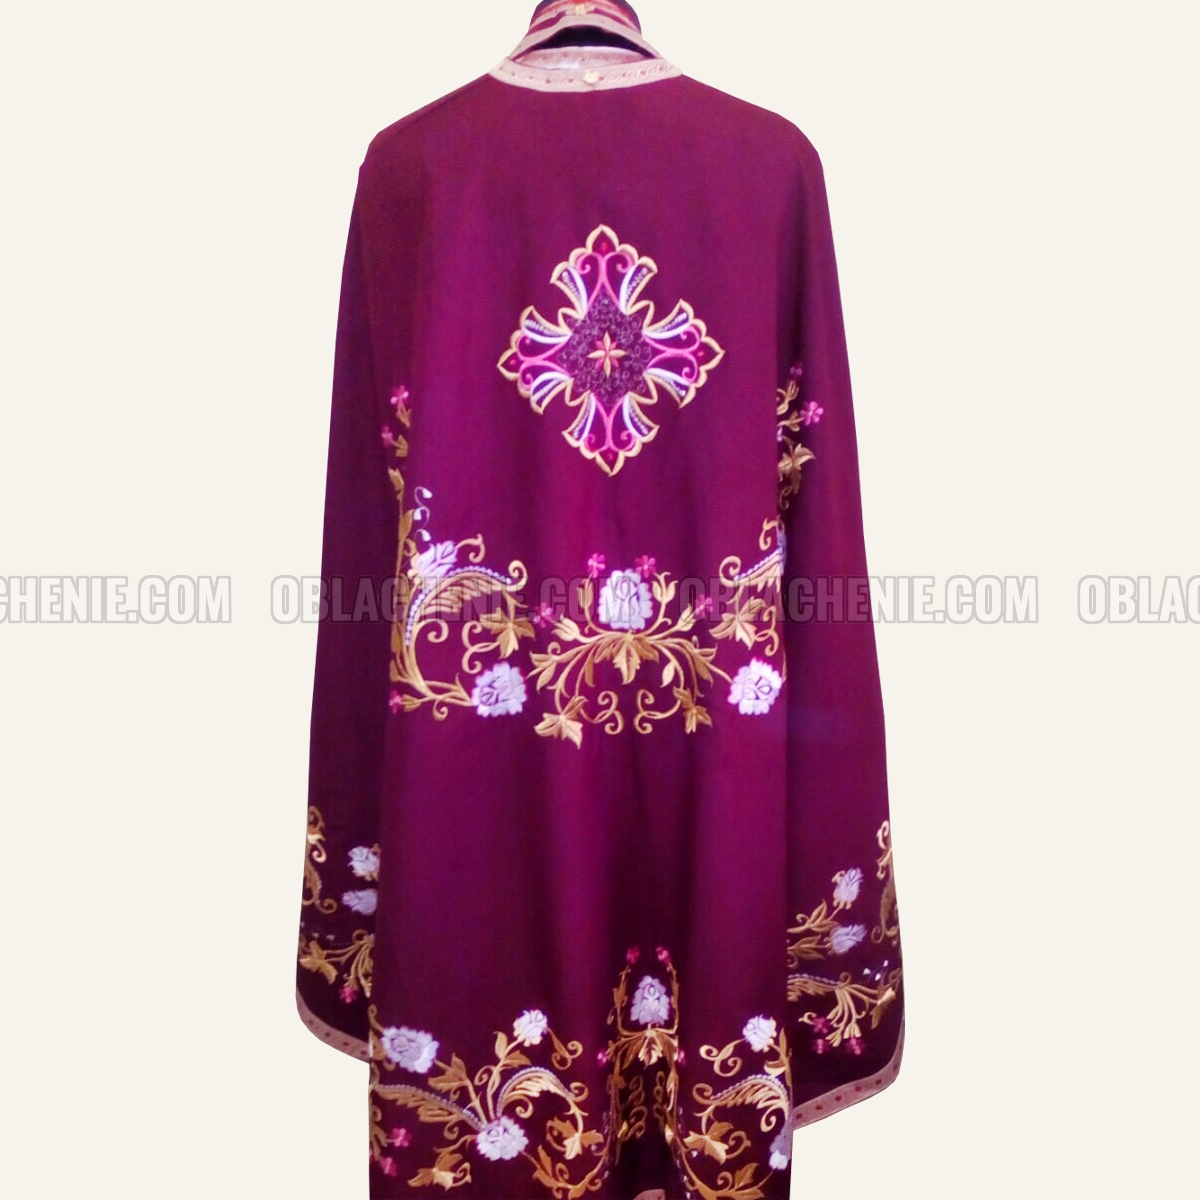 Embroidered priest's vestments 10238